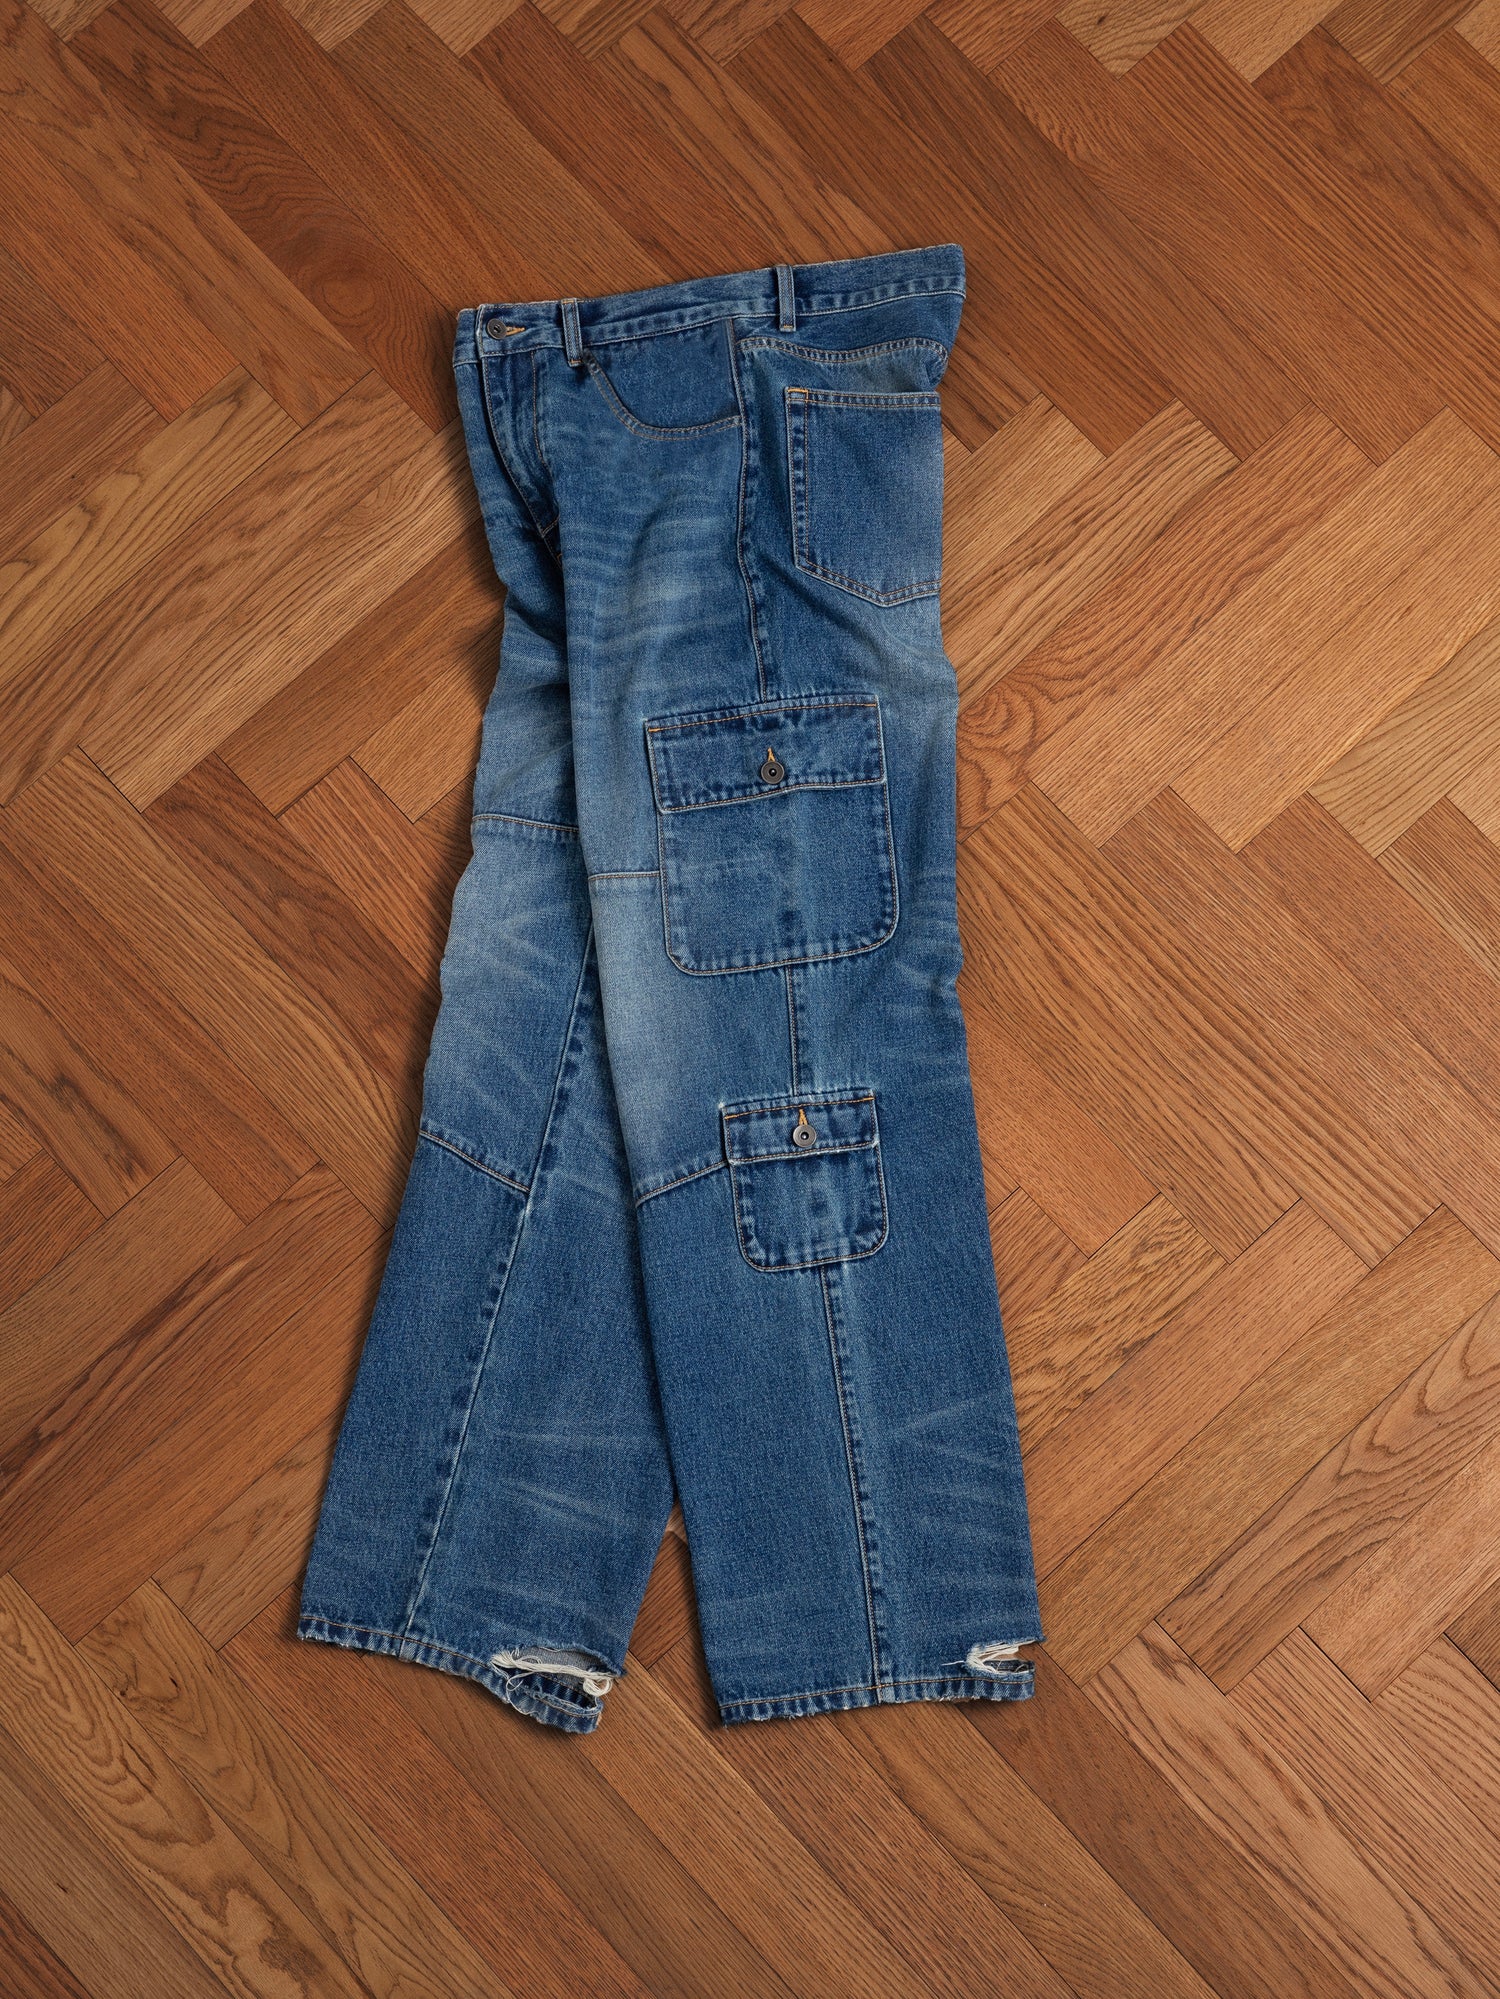 A pair of Siwa Cargo Paneled Jeans laid flat on a herringbone-patterned wooden floor by Found.